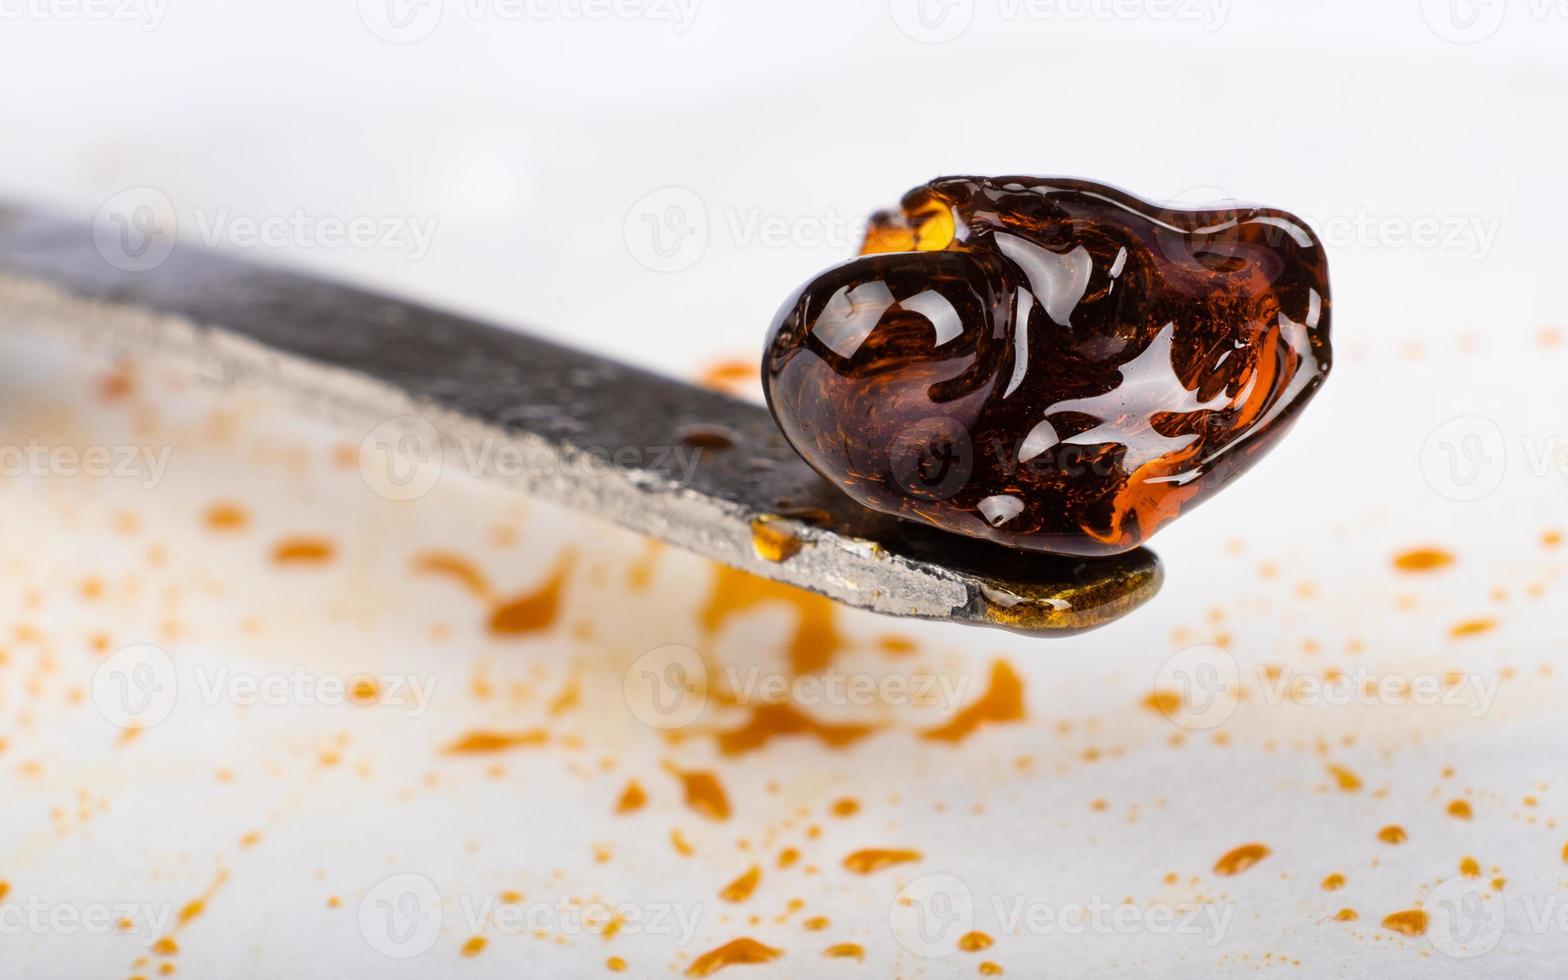 scraping high thc medical cannabis wax resin concentrate photo